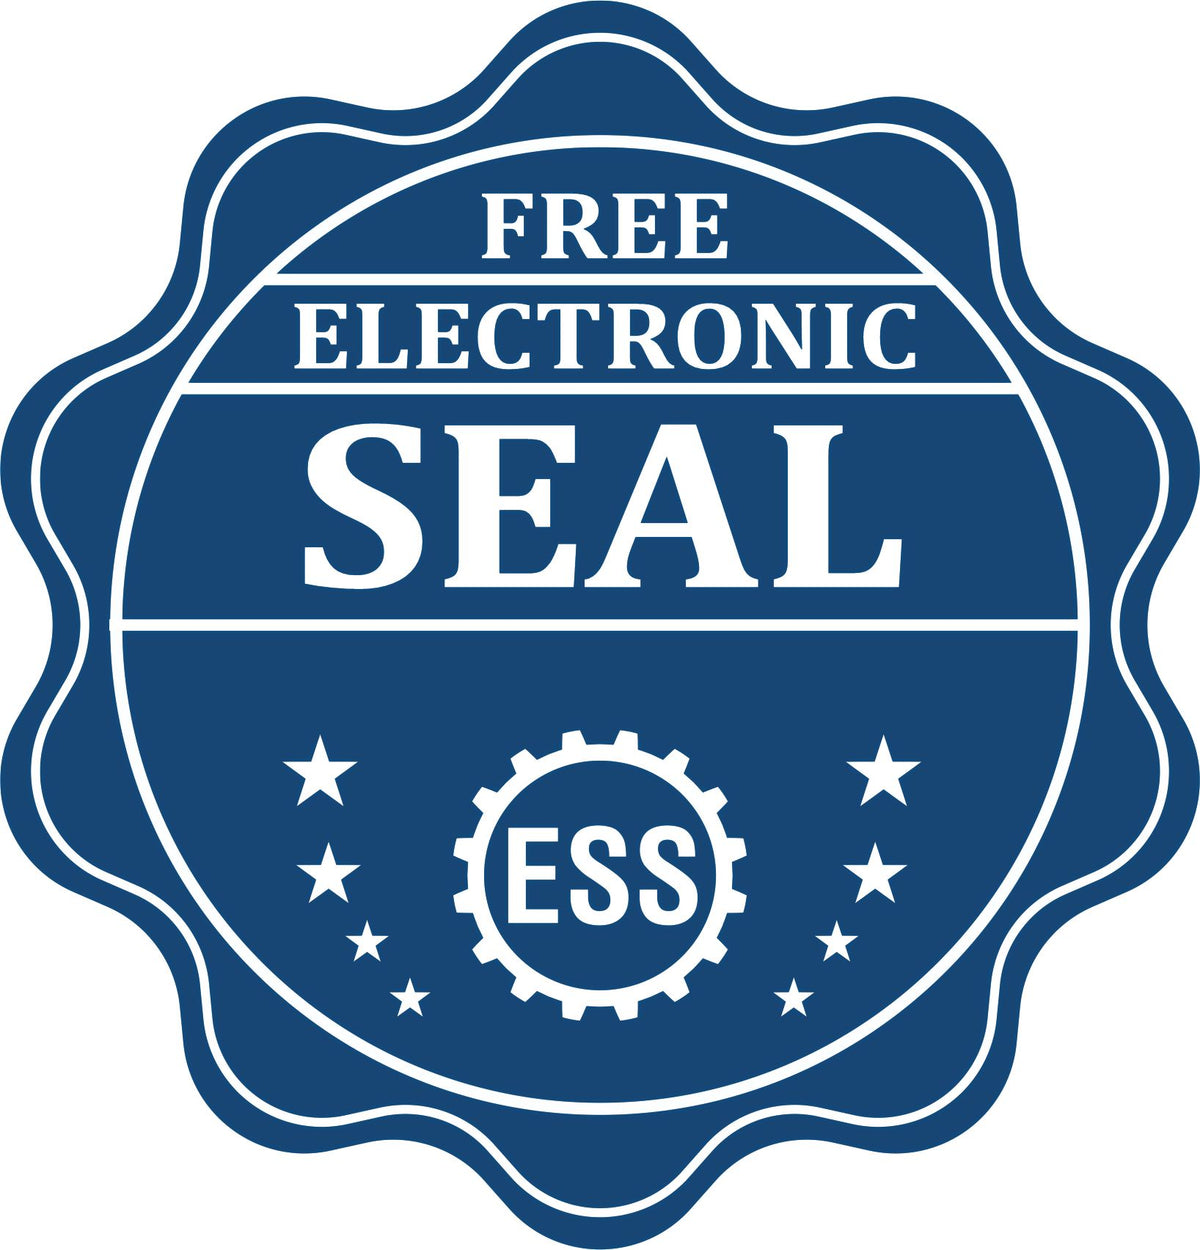 A badge showing a free electronic seal for the Delaware Geologist Desk Seal with stars and the ESS gear on the emblem.